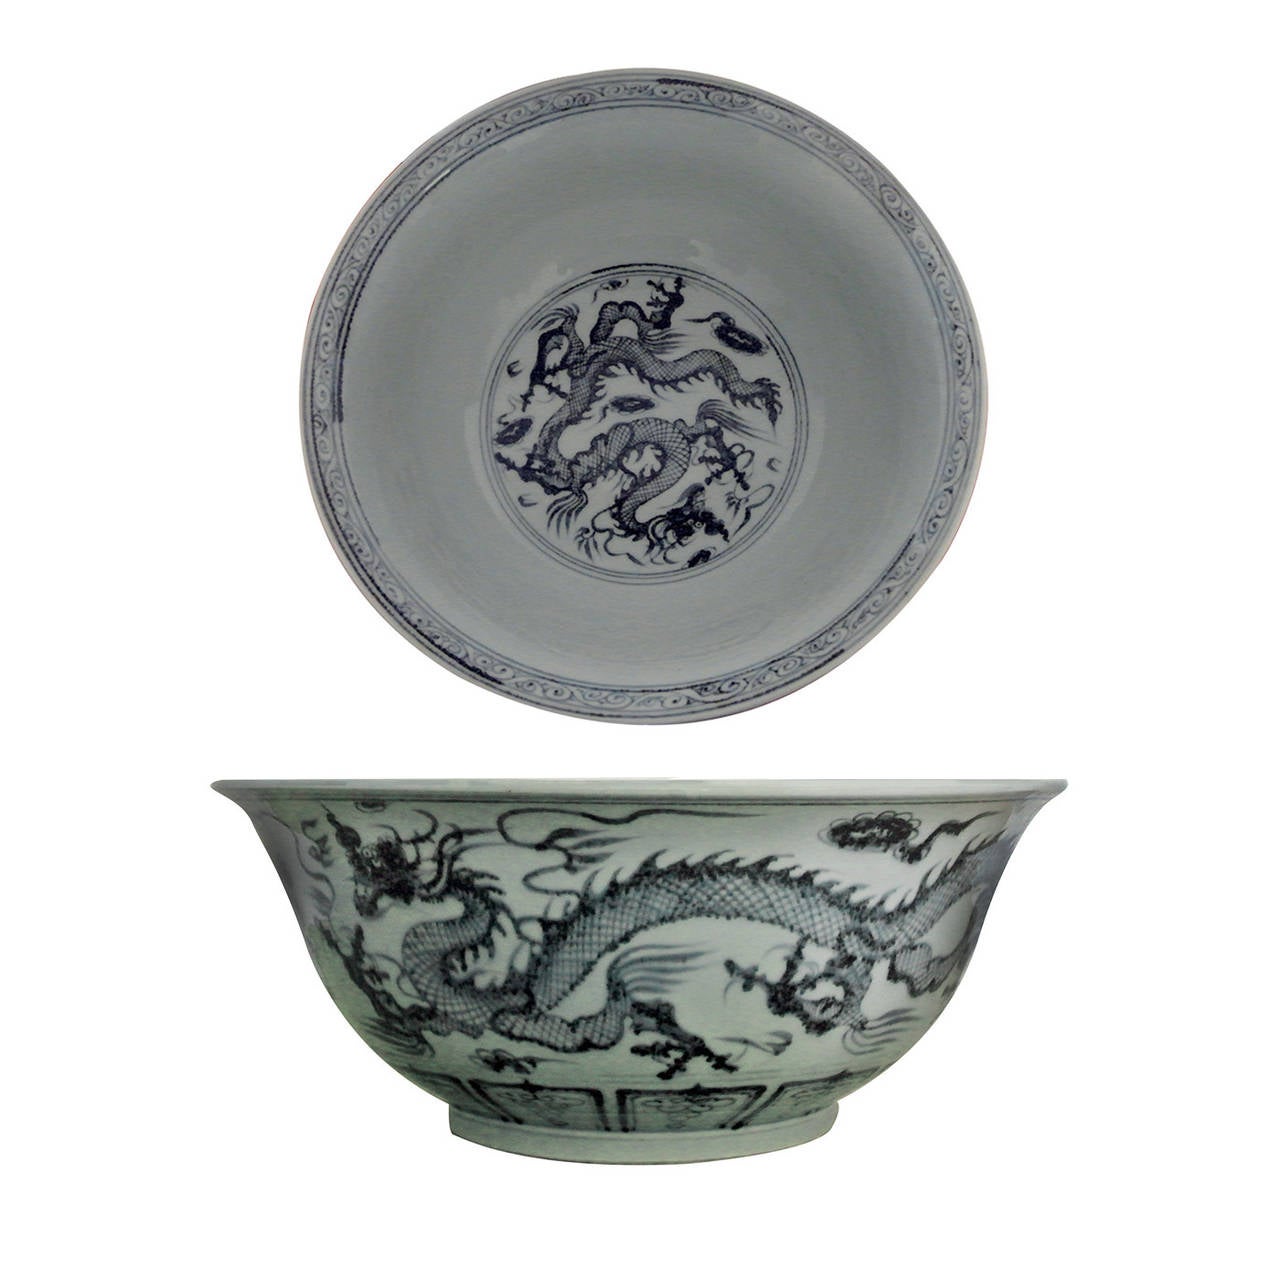 Accent Bowl in Blue and White Porcelain Hand-Painted in Style of the Ming Period. Please note that this Bowl is only for Decorative Purpose and should not be used to serve Food.